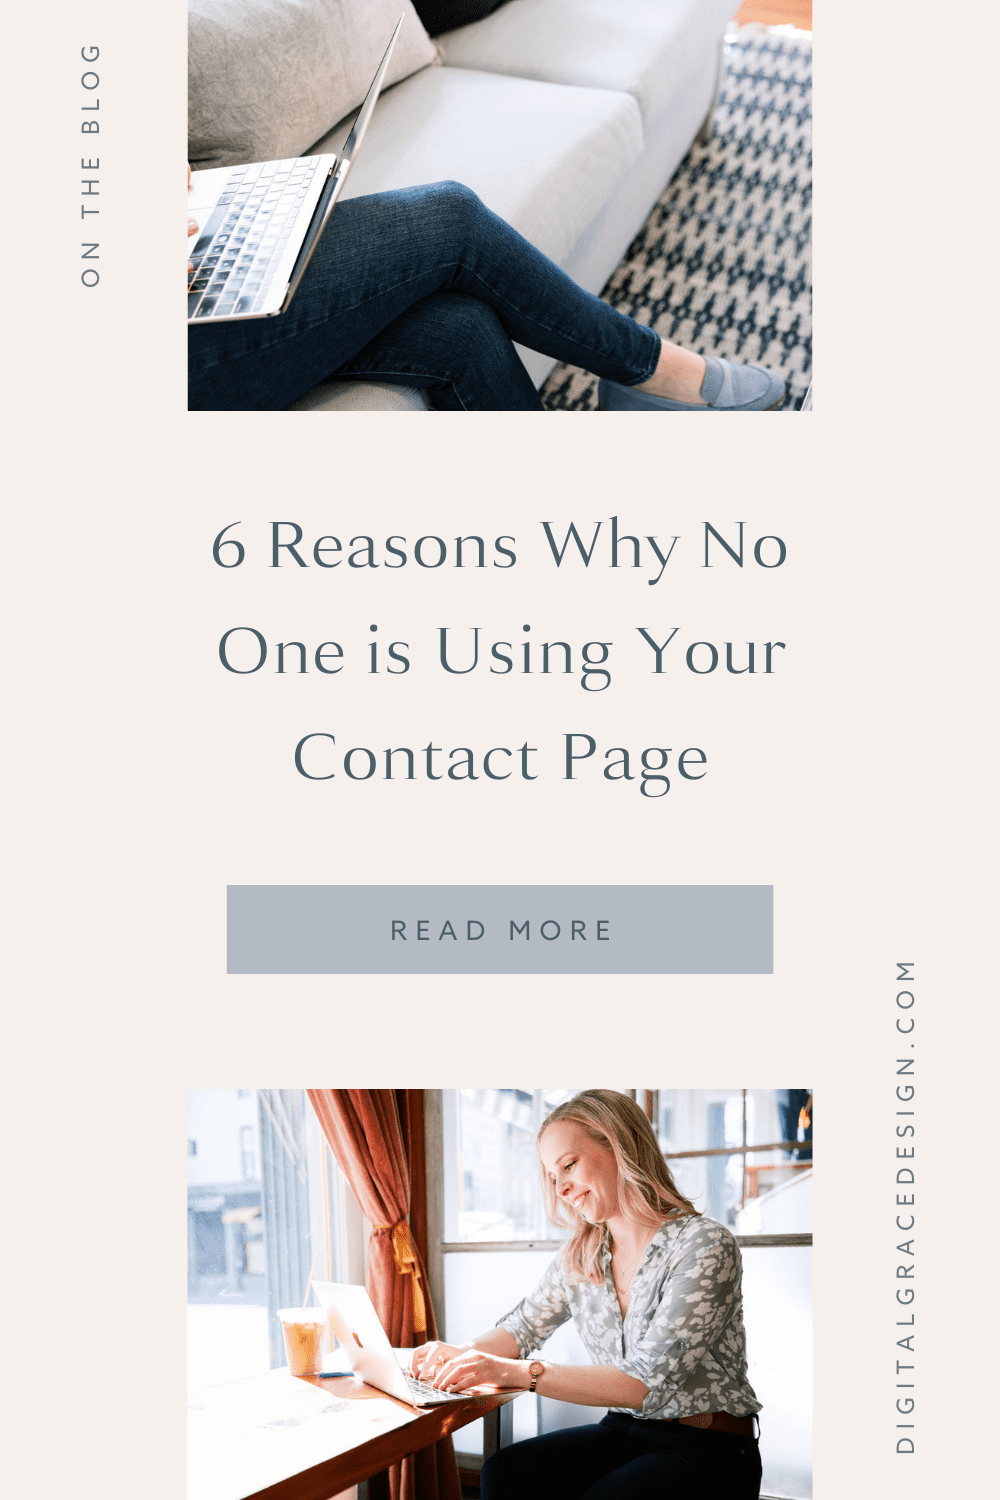 6 Reasons Why No One is Using Your Contact Page